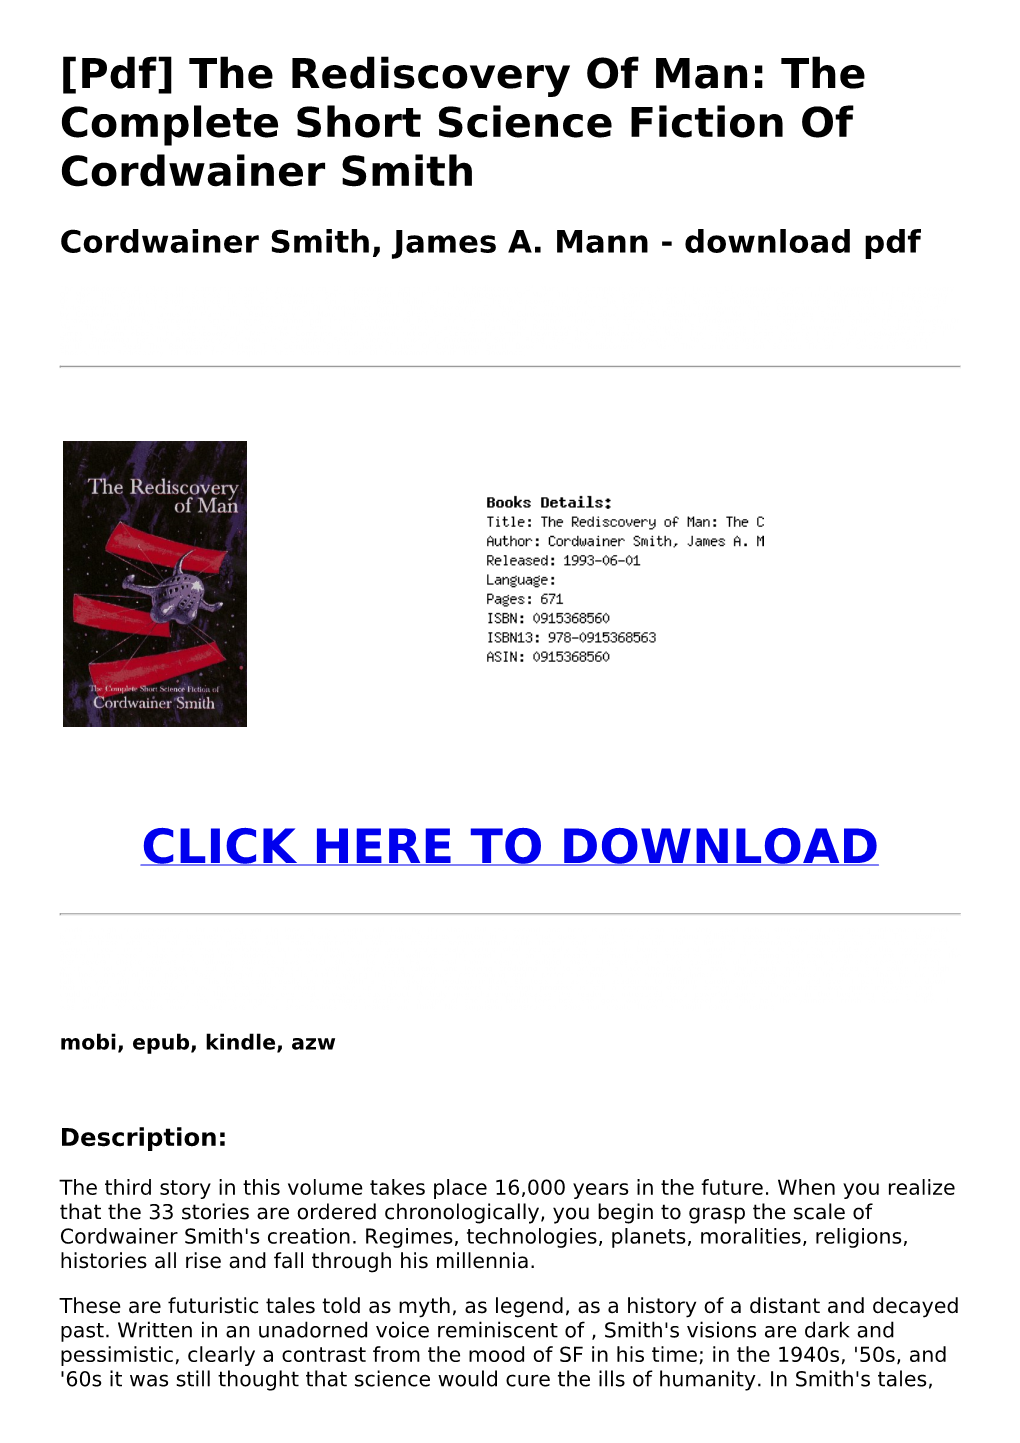 [Pdf] the Rediscovery of Man: the Complete Short Science Fiction of Cordwainer Smith Cordwainer Smith, James A. Mann